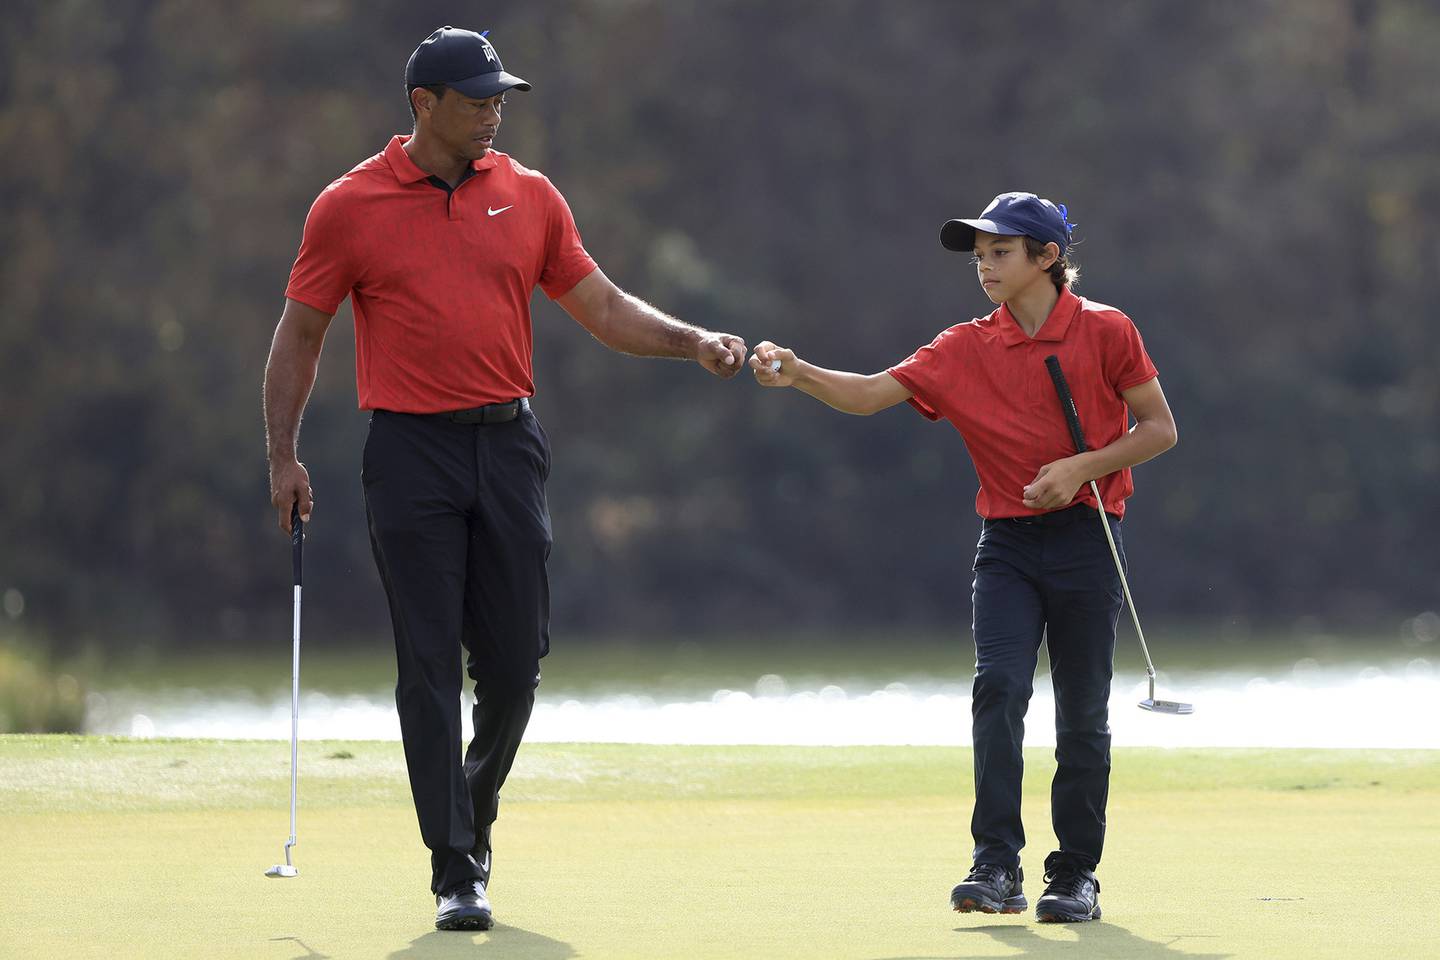 Tiger Woods and Charlie Woods celebrate a birdie on the 13th hole during the final round of the PNC Championship on Dec. 19, 2021, at the Ritz Carlton Golf Club Grande Lakes in Orlando, Fla.